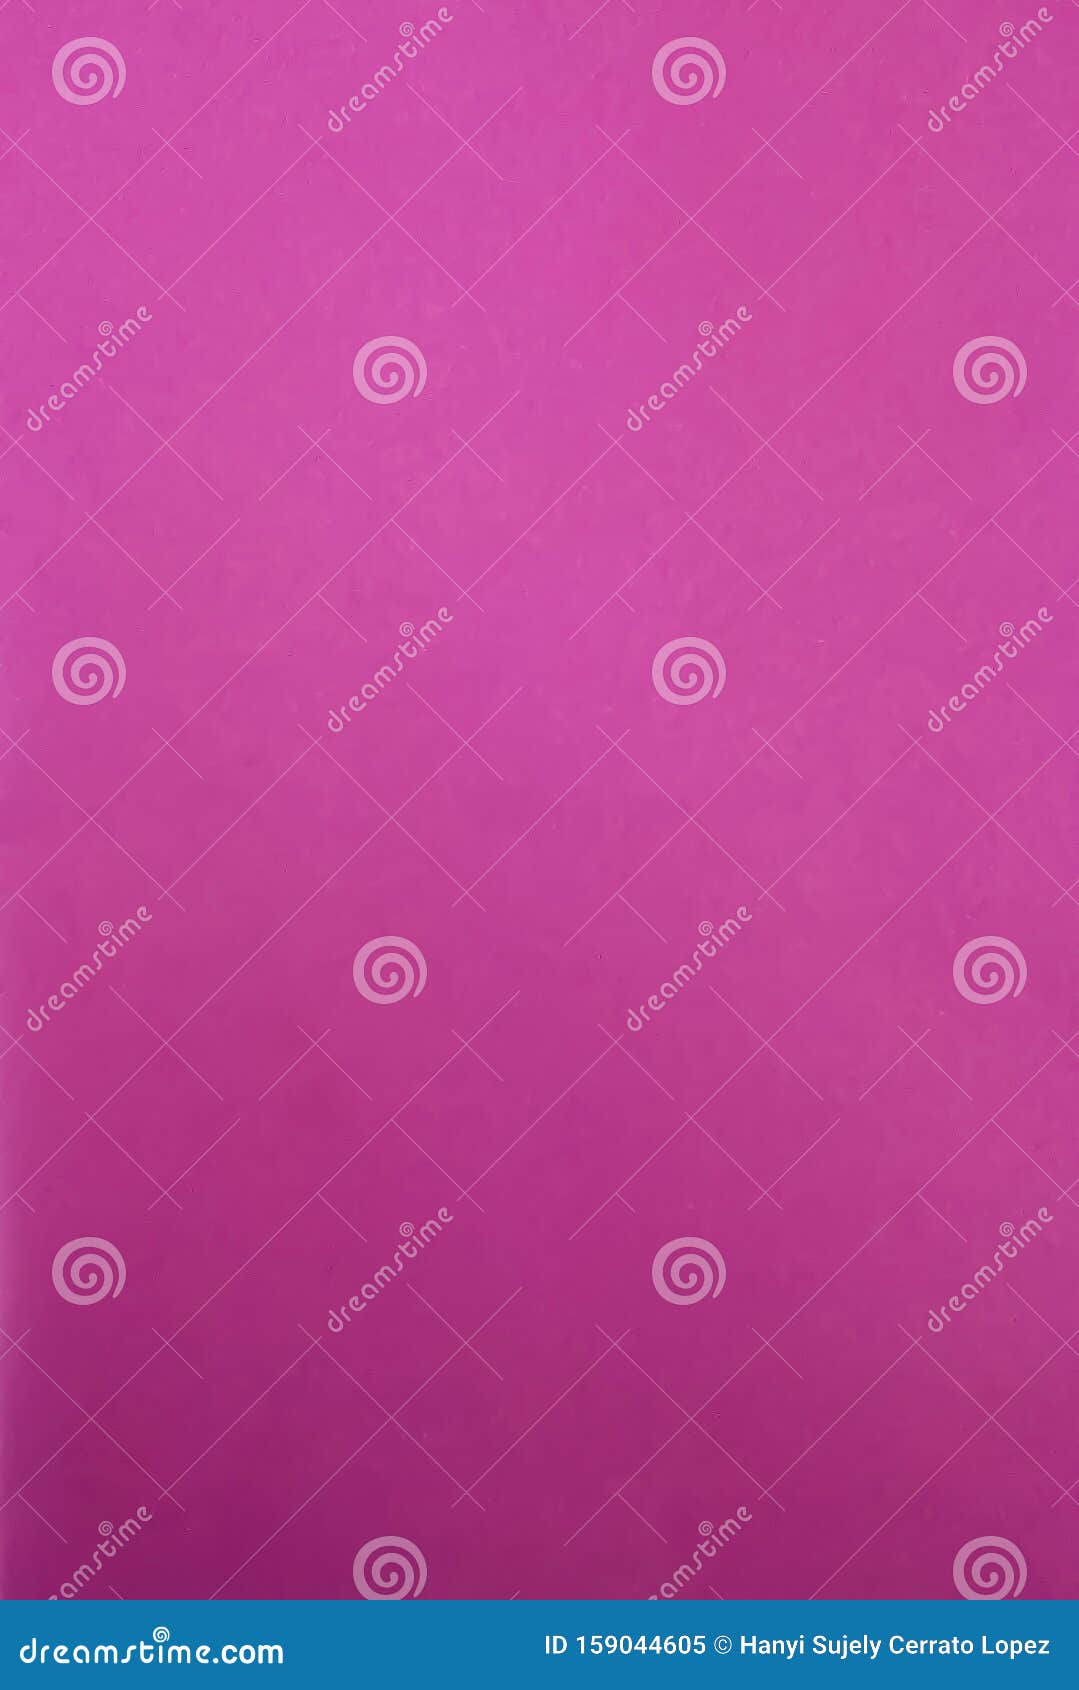 image of a solid purple background